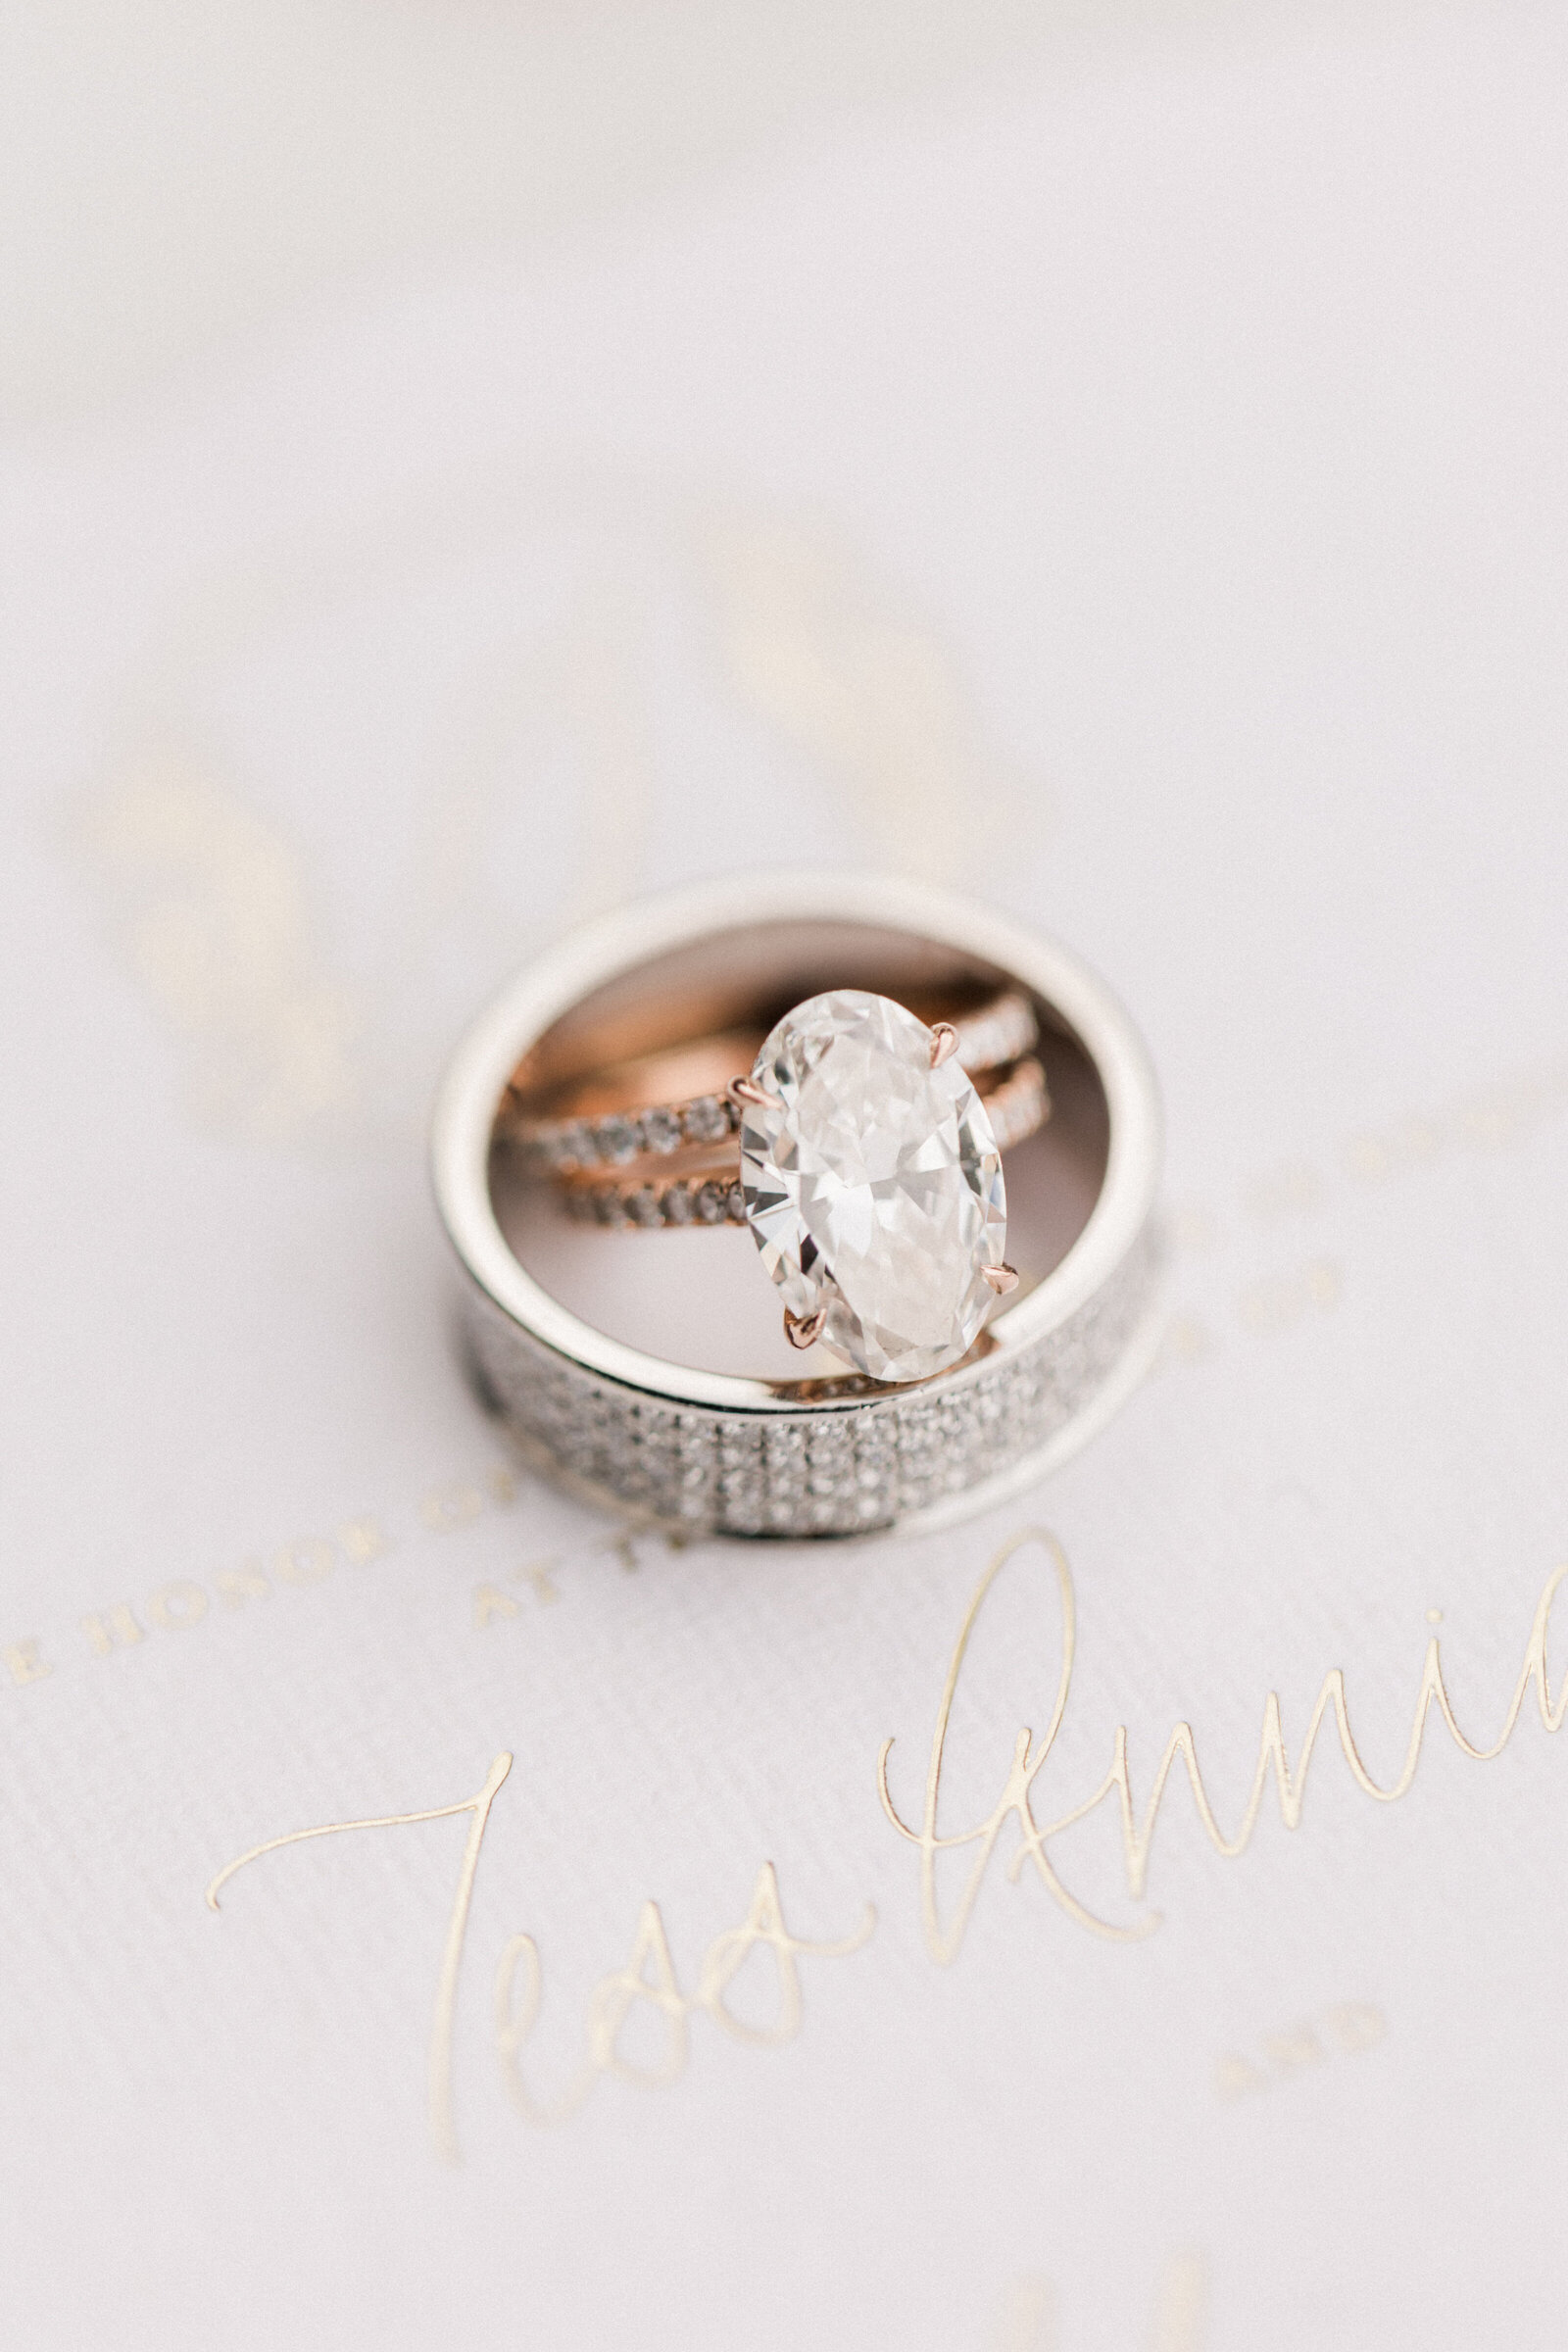 Gozzer Ranch Wedding-Valorie Darling Photography-DF1A0073